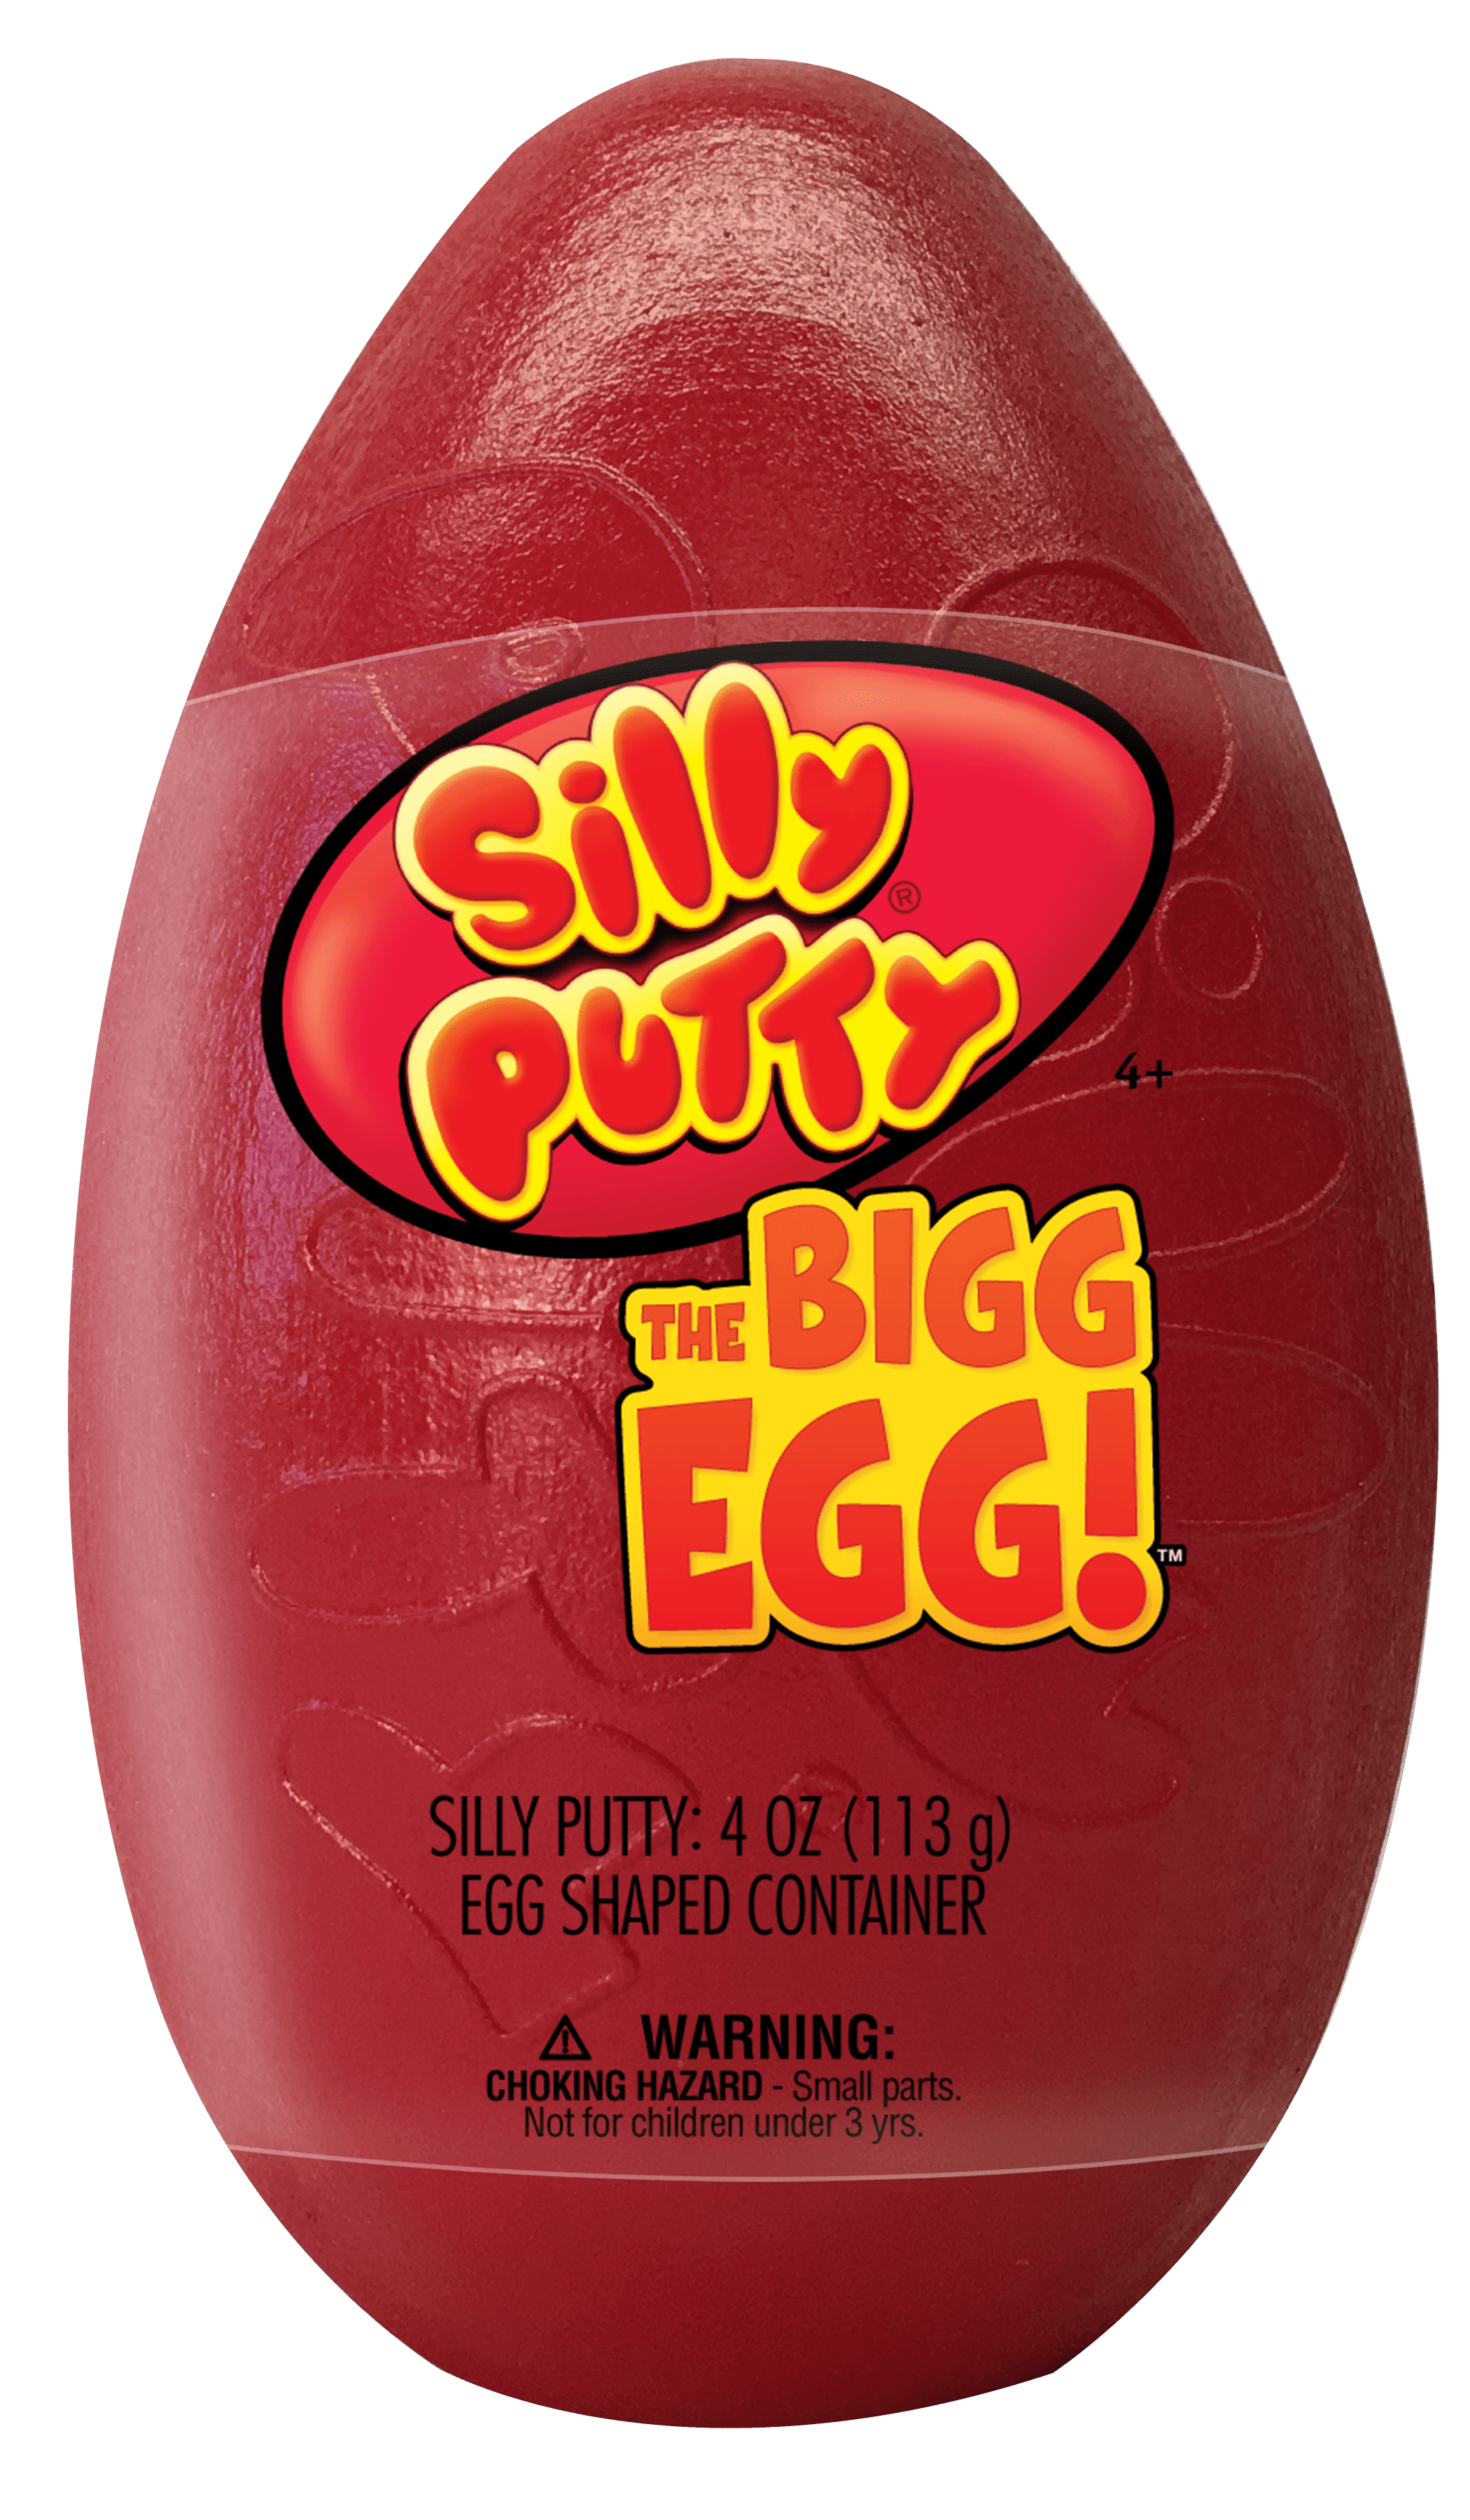 Lot of 8 Silly Putty Bigg Egg 4 oz each 2 Pink 2 Blue 2 Yellow 2 Green New 